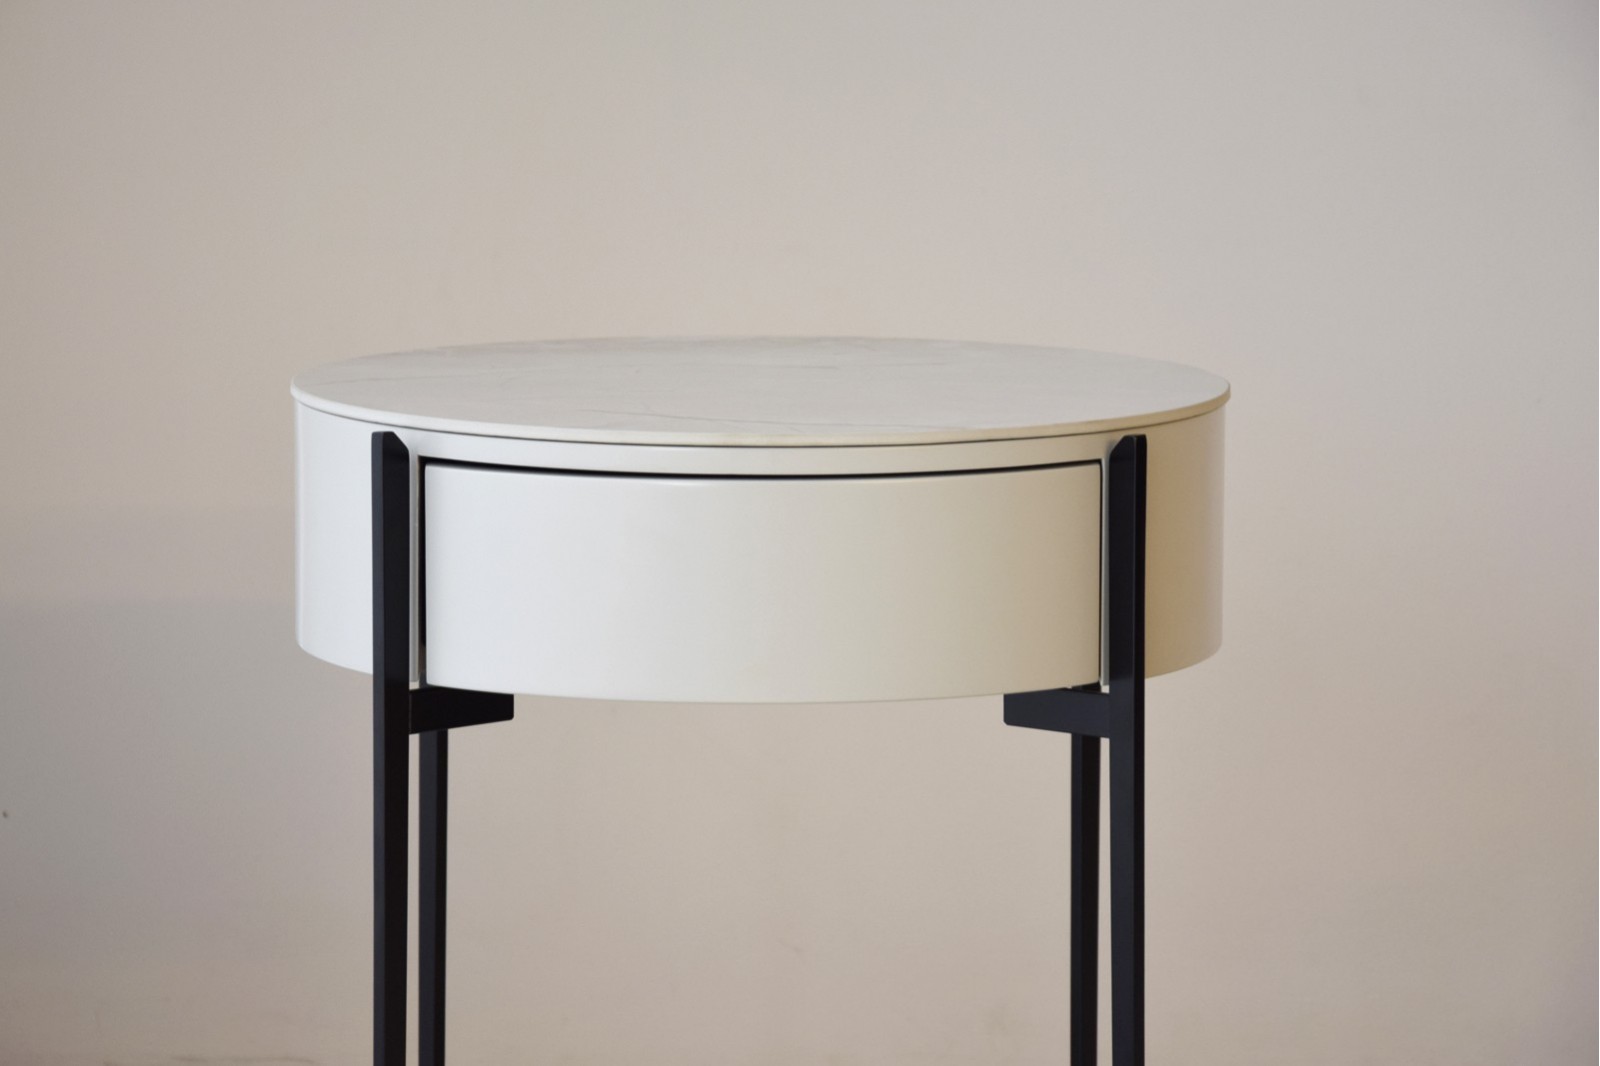 SIDE TABLE N.18. WHITE CERAMIC MARBLE TOP